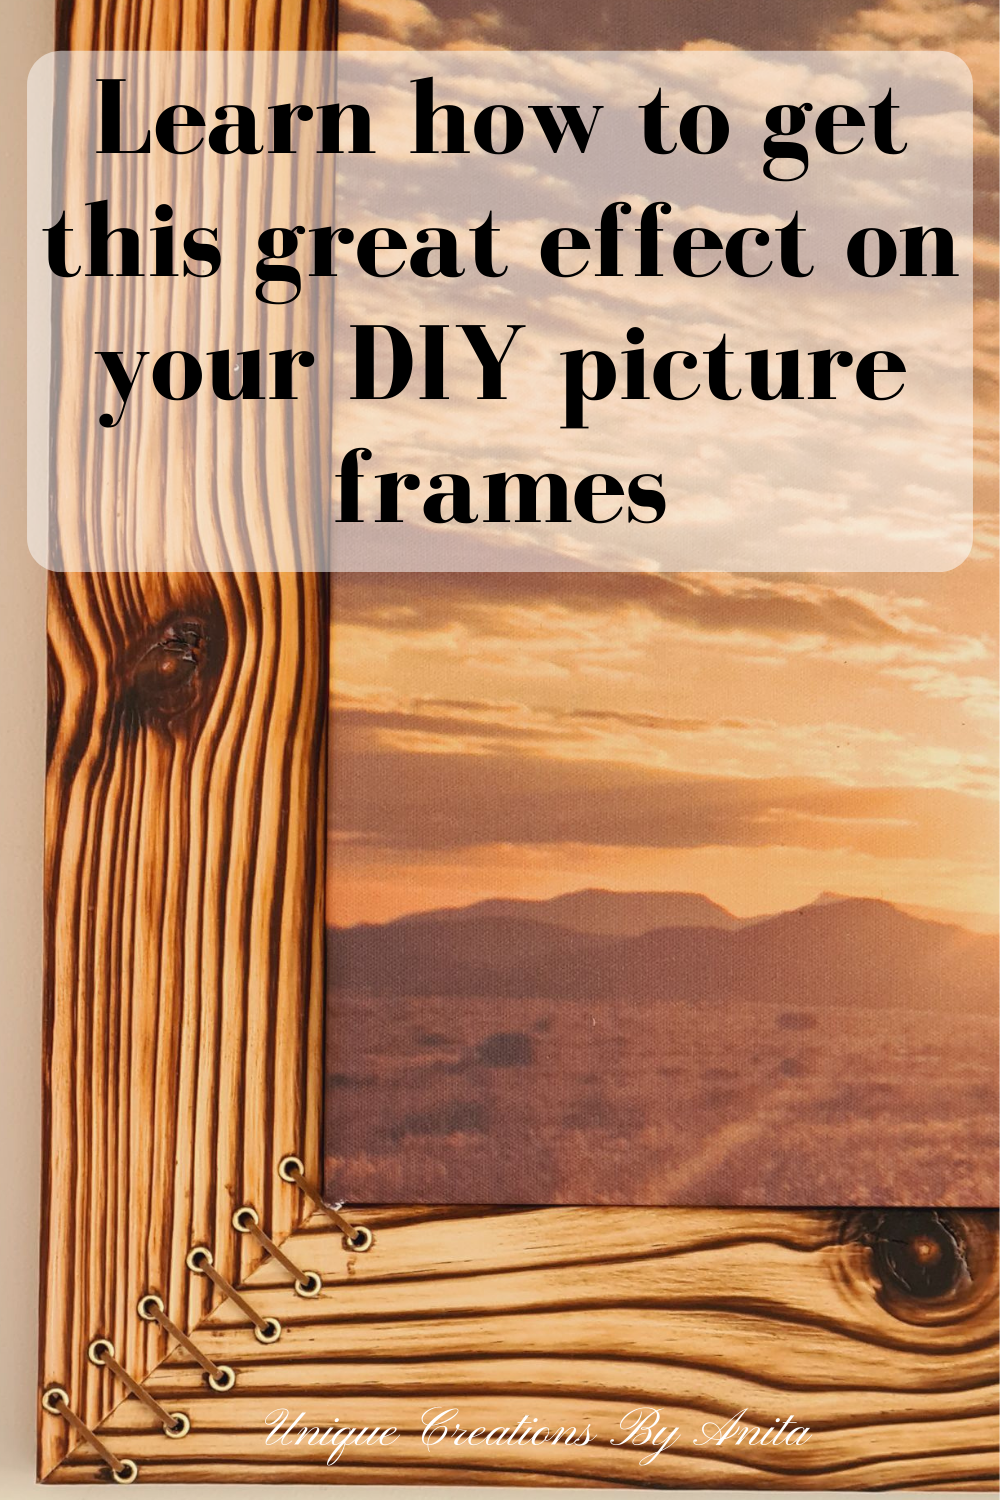 Why settle for a boring picture frame, when with a little work you can get this awesome effect that offers contrast and texture to your wood frames.